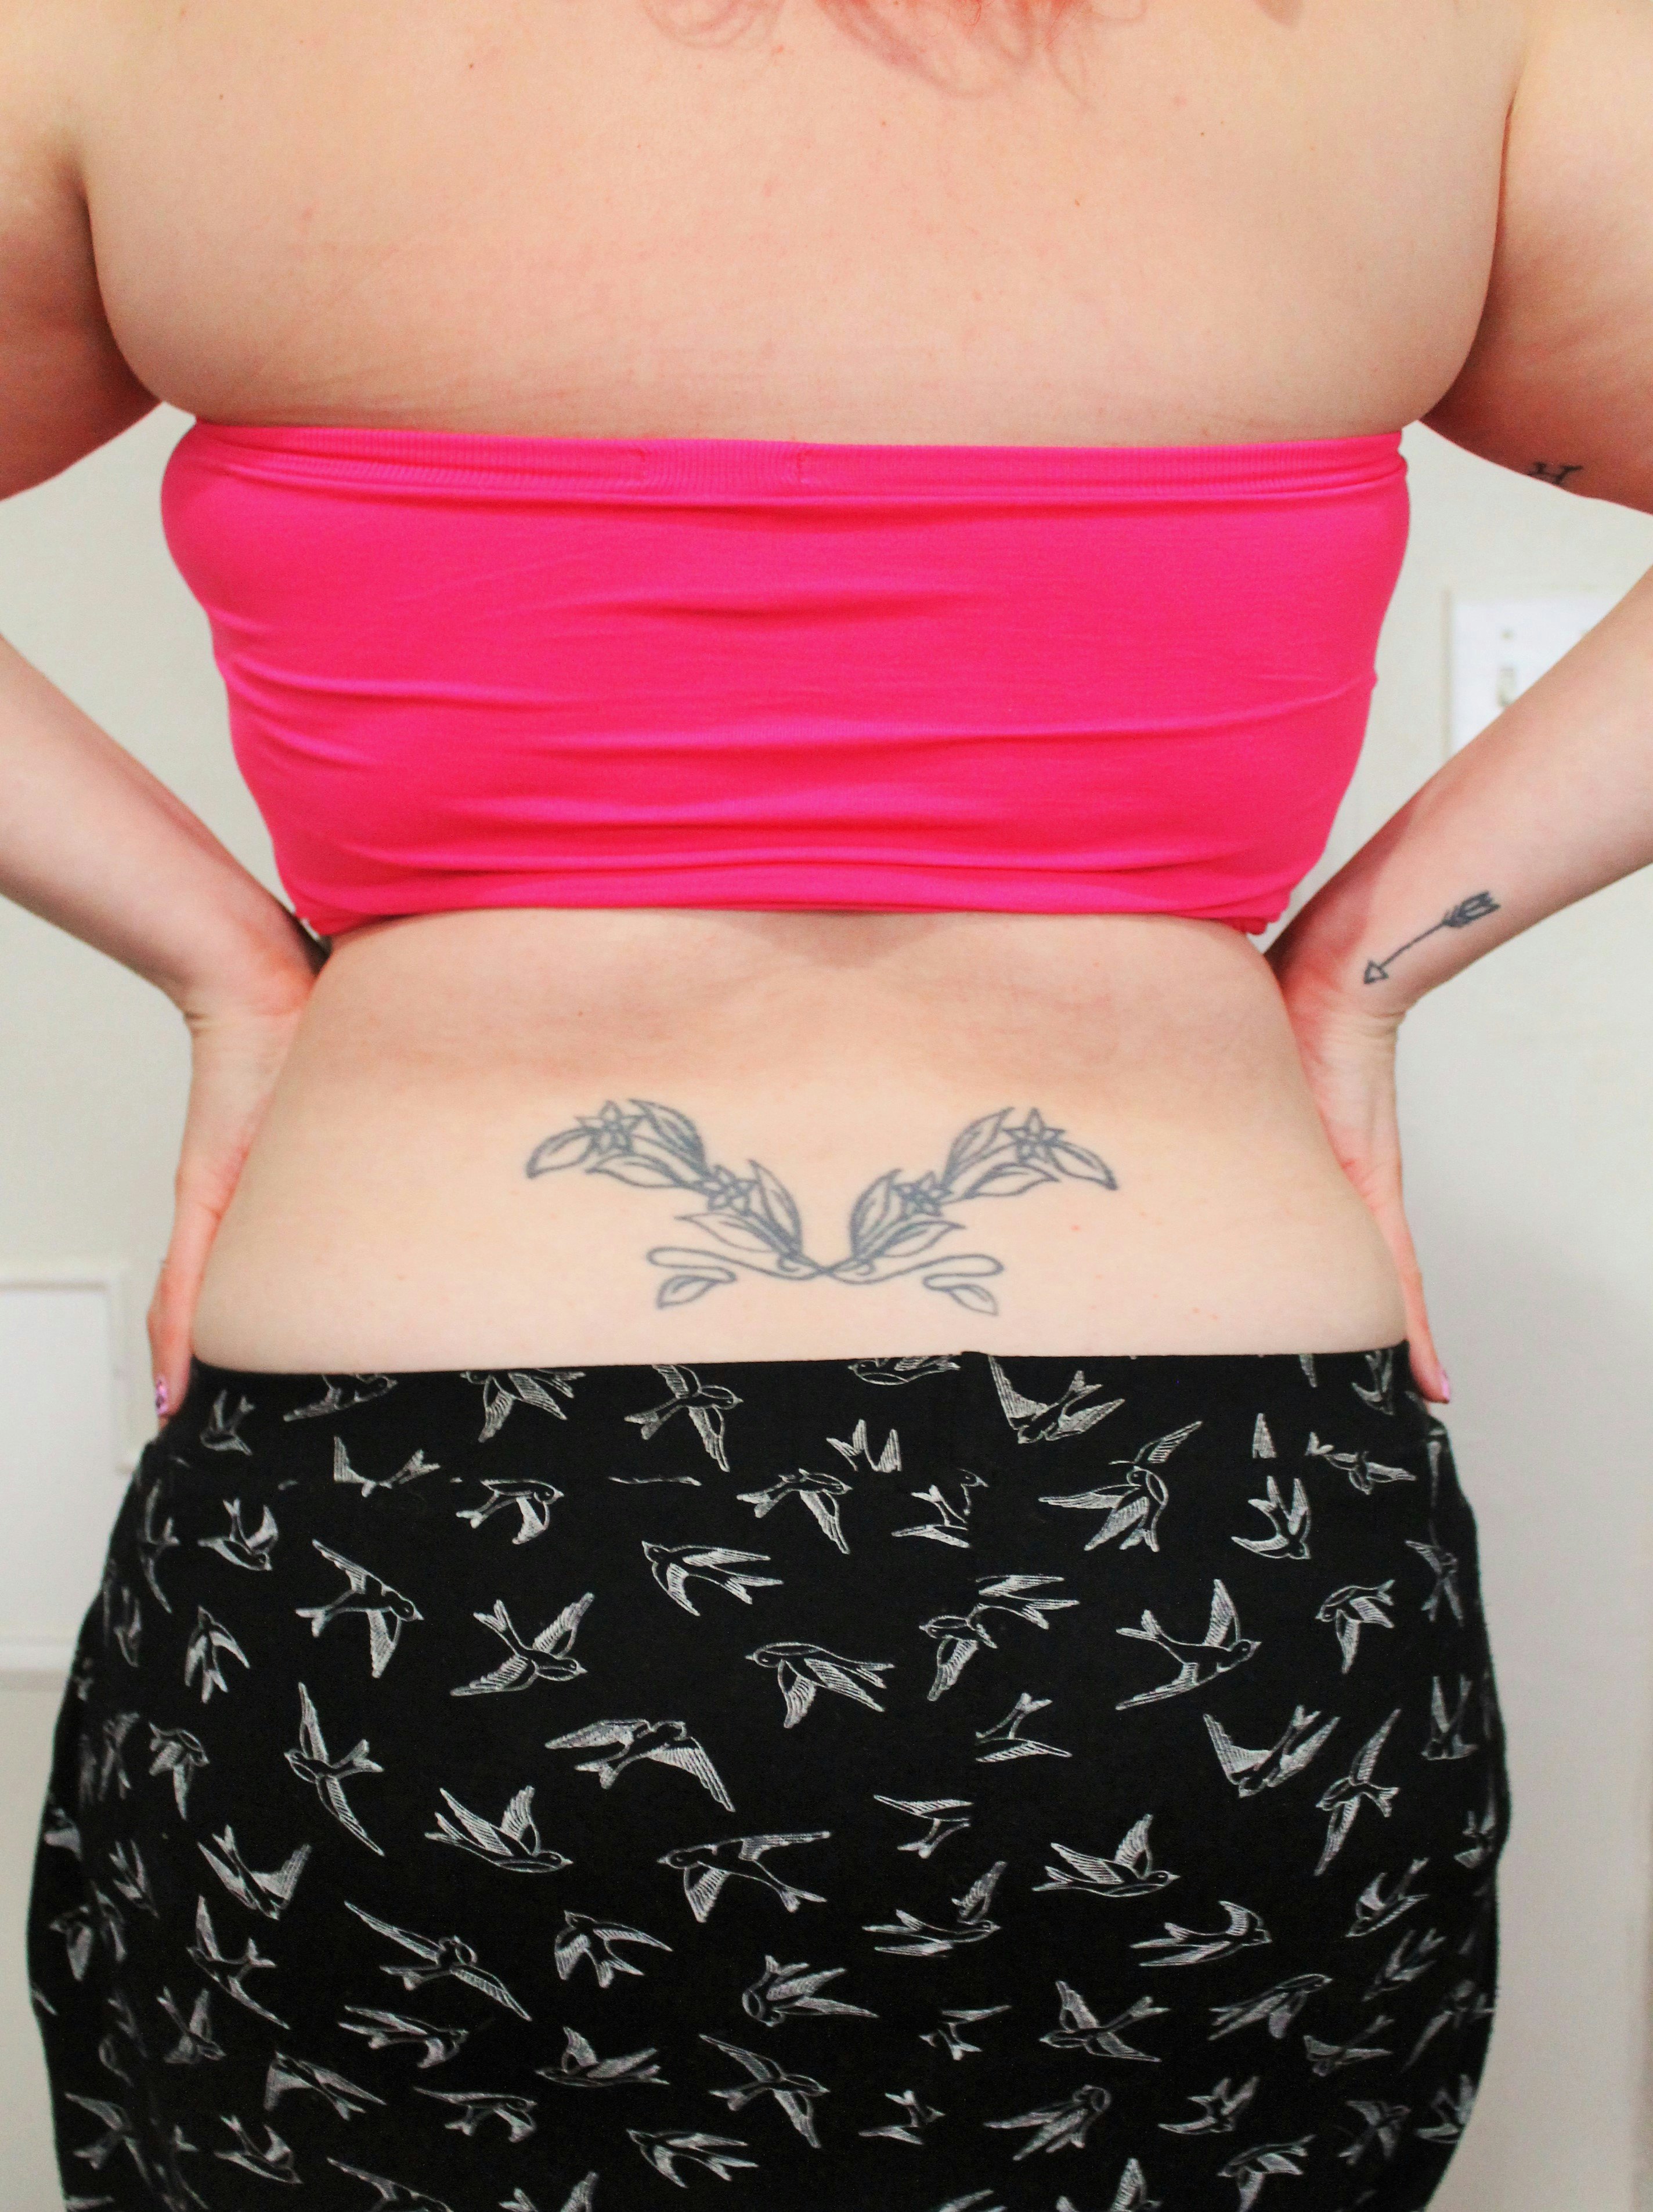 9 Things Women With A Lower Back Tattoo Are Sick Of Hearing So Stop It With Your Tramp Stamp Nonsense pic